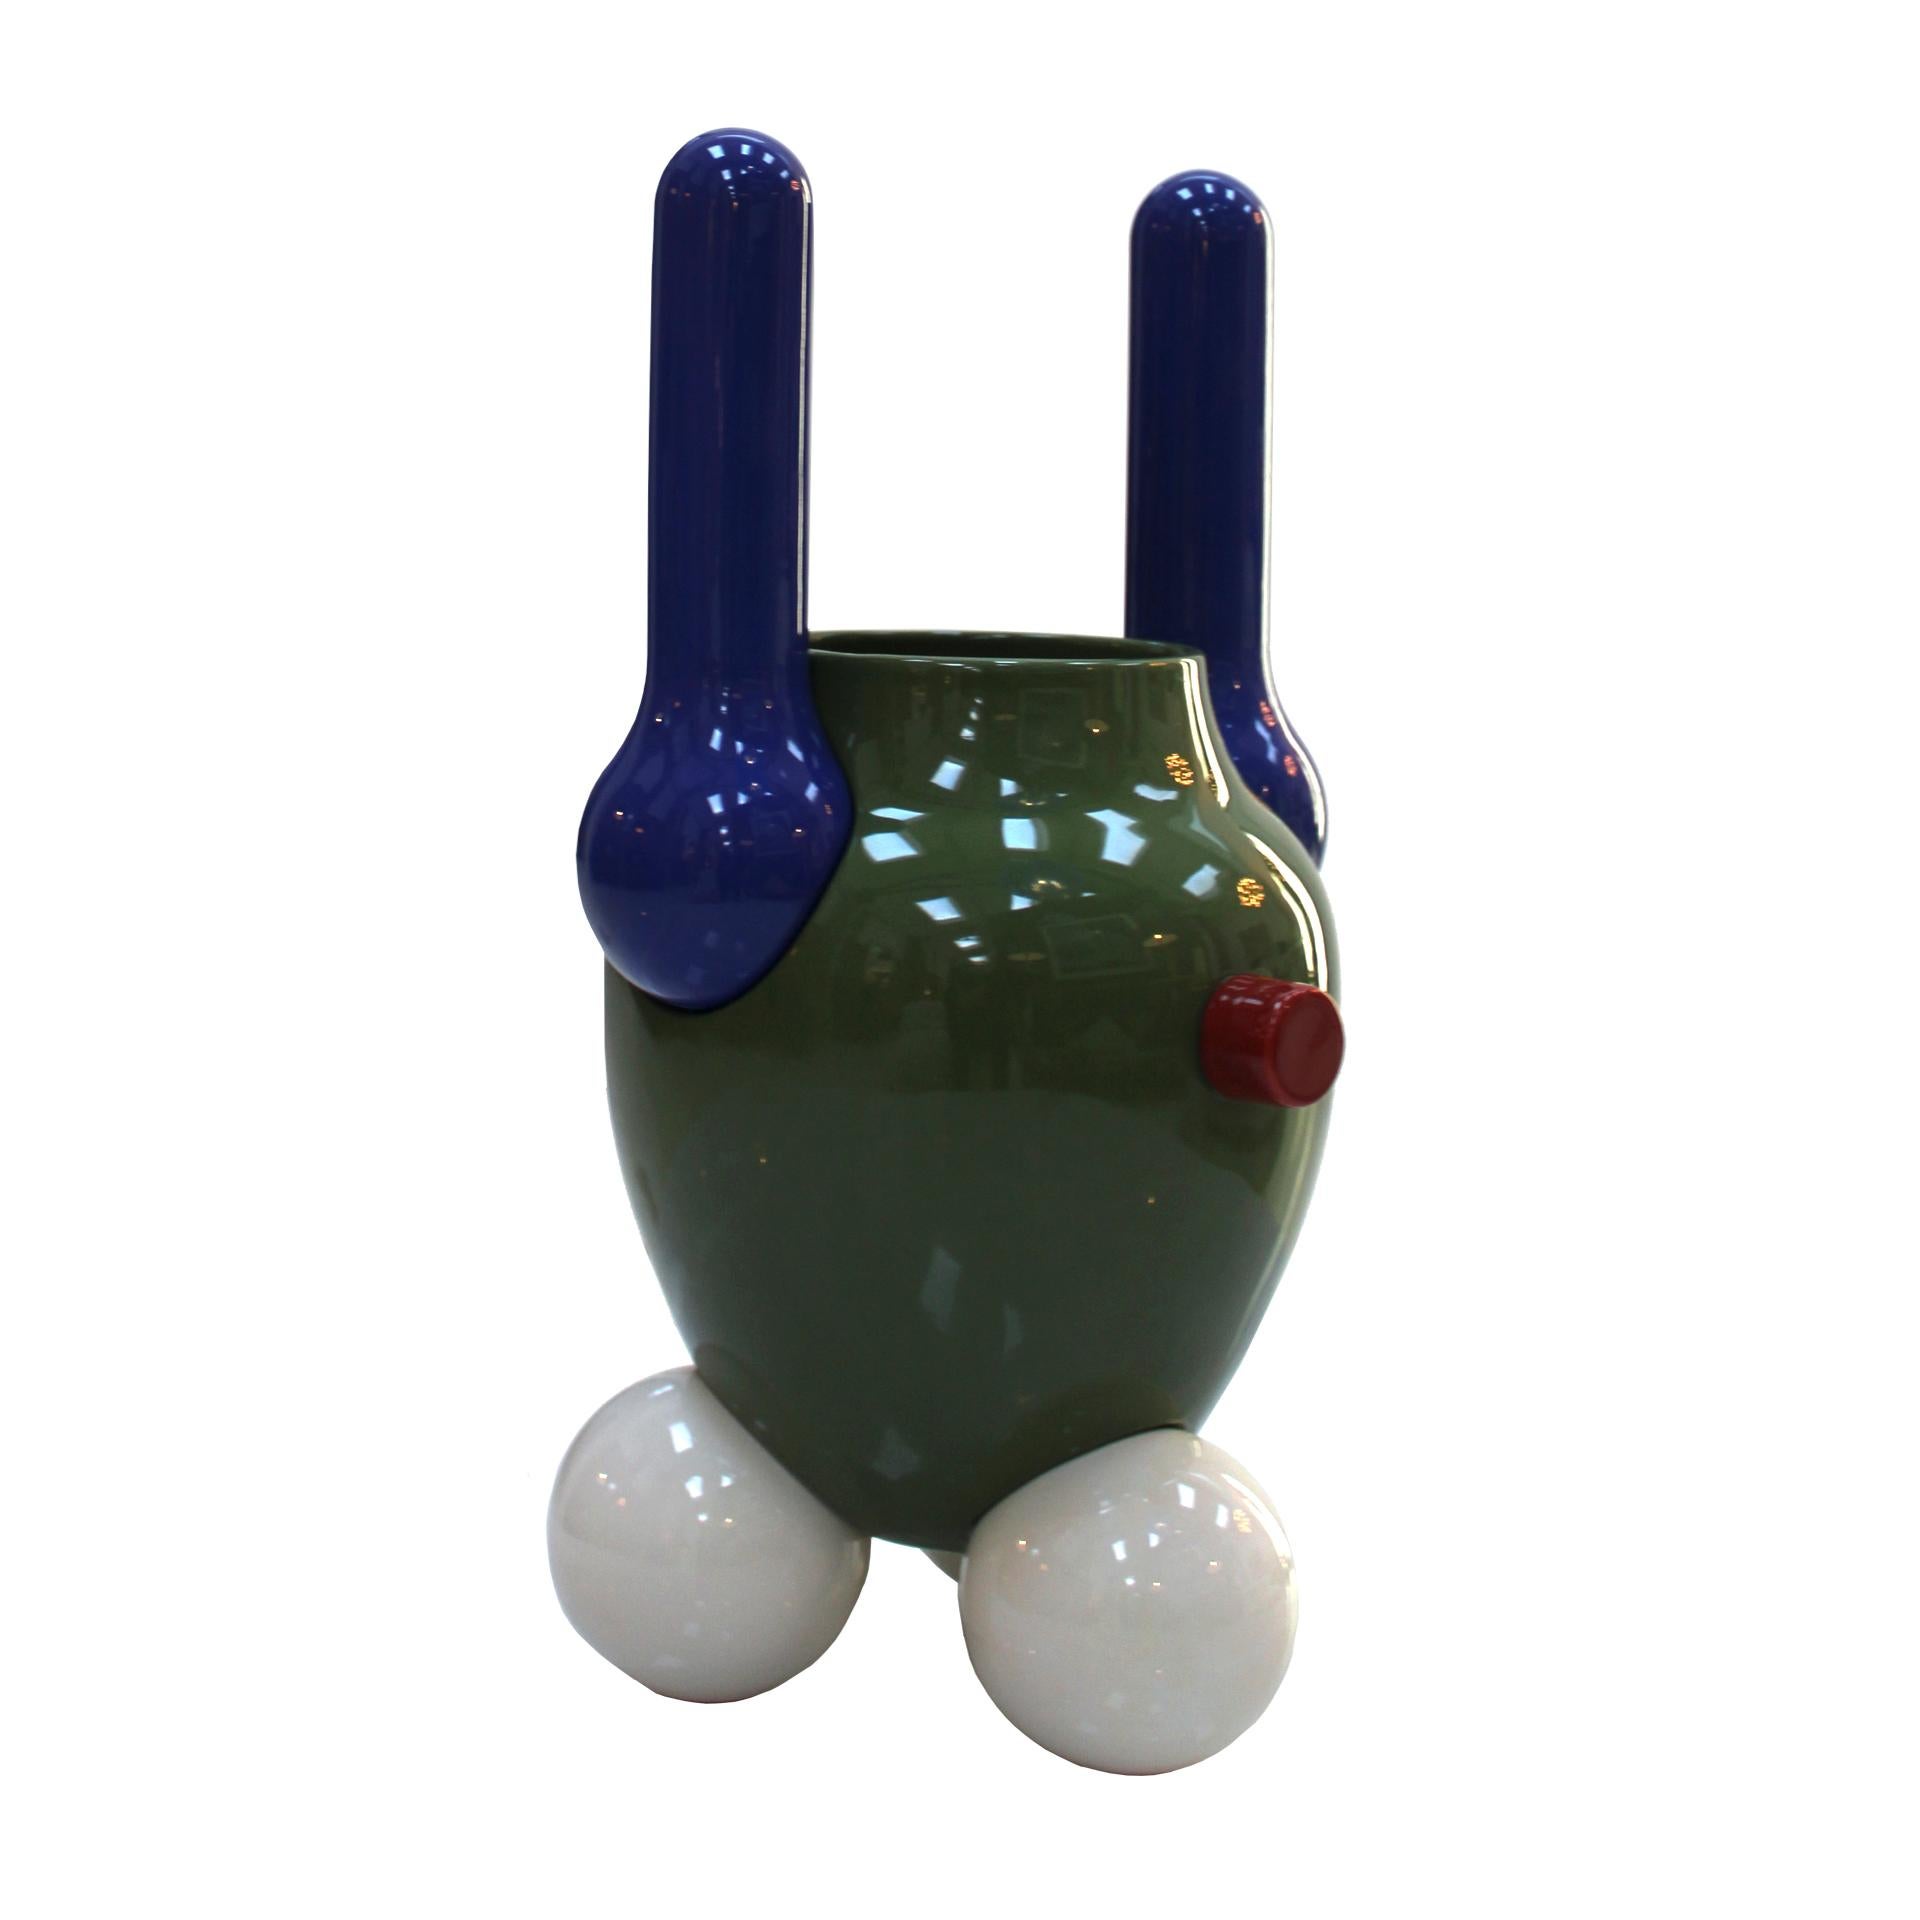 Contemporary vase handmade in several pieces, in enamelled stoneware ceramic in different colours.
Designed by the recognised spanish Jaime Hayon, they are inspired on the spaceships send to space to explore other planets and ways of life. The